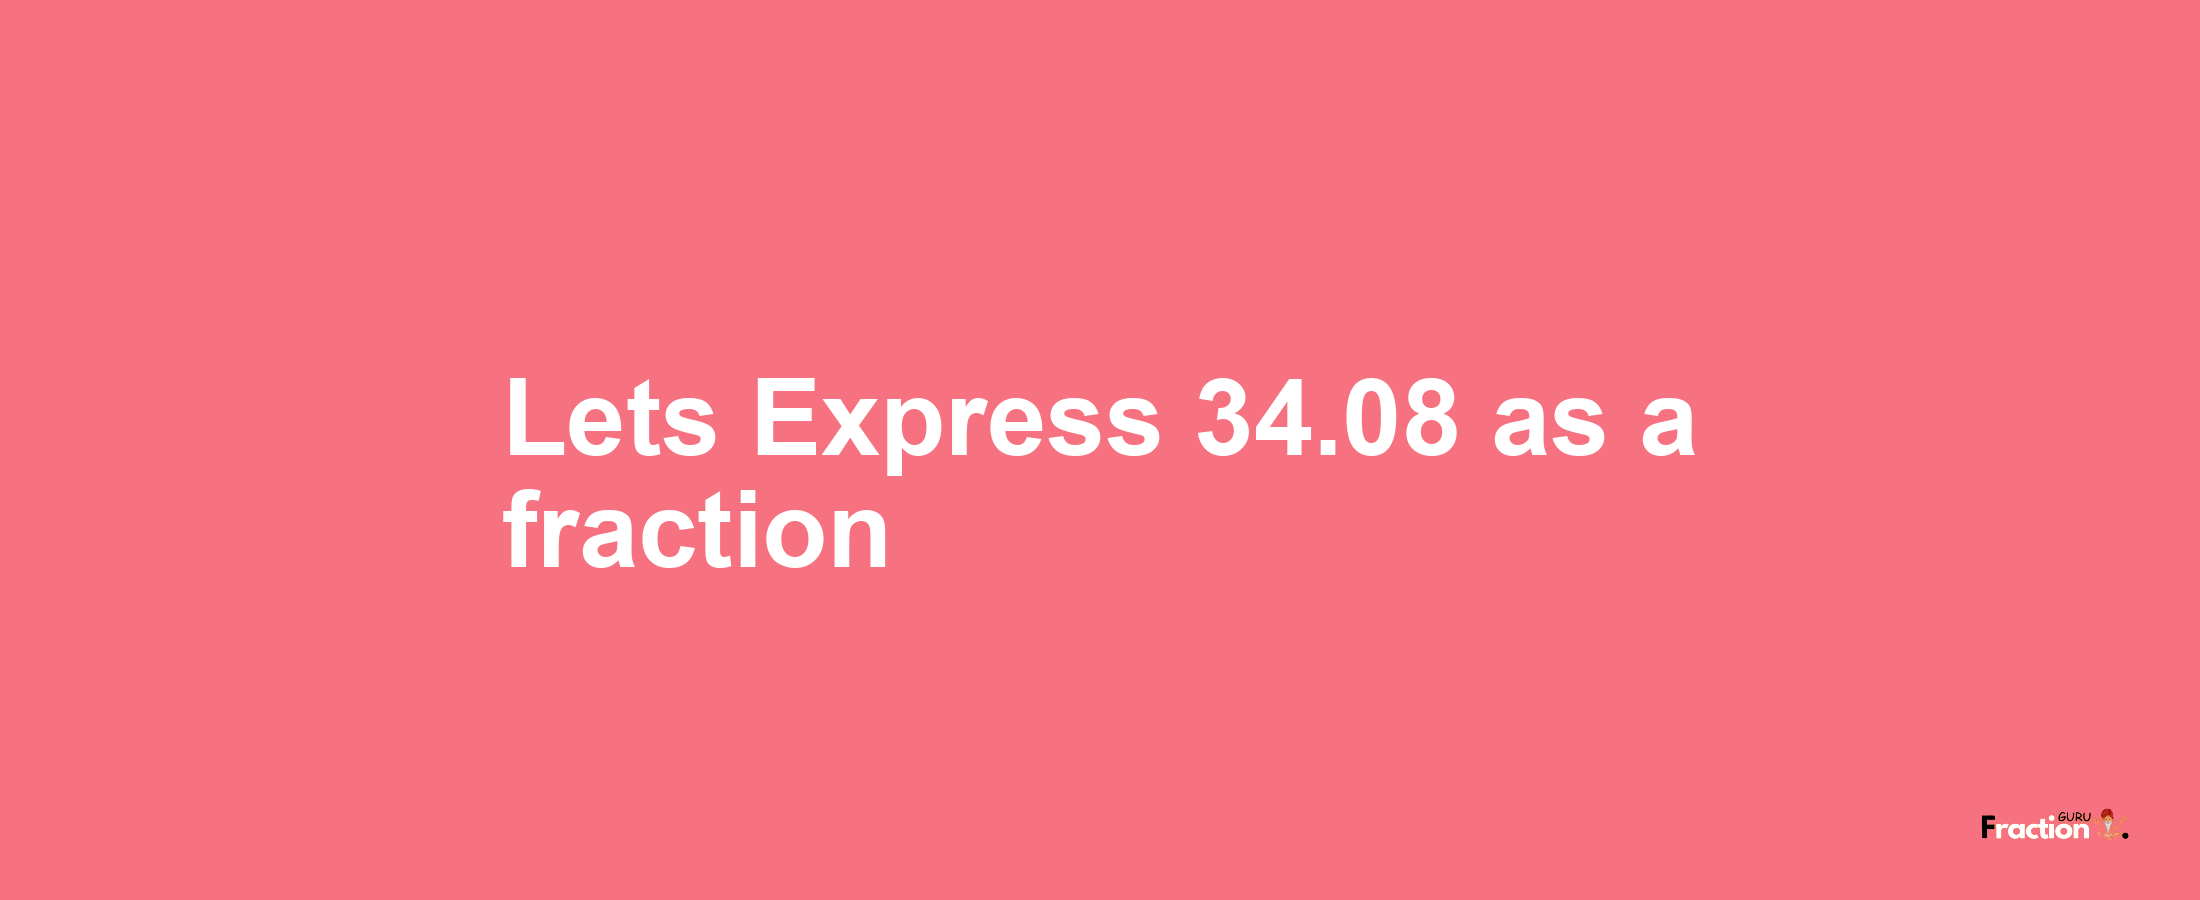 Lets Express 34.08 as afraction